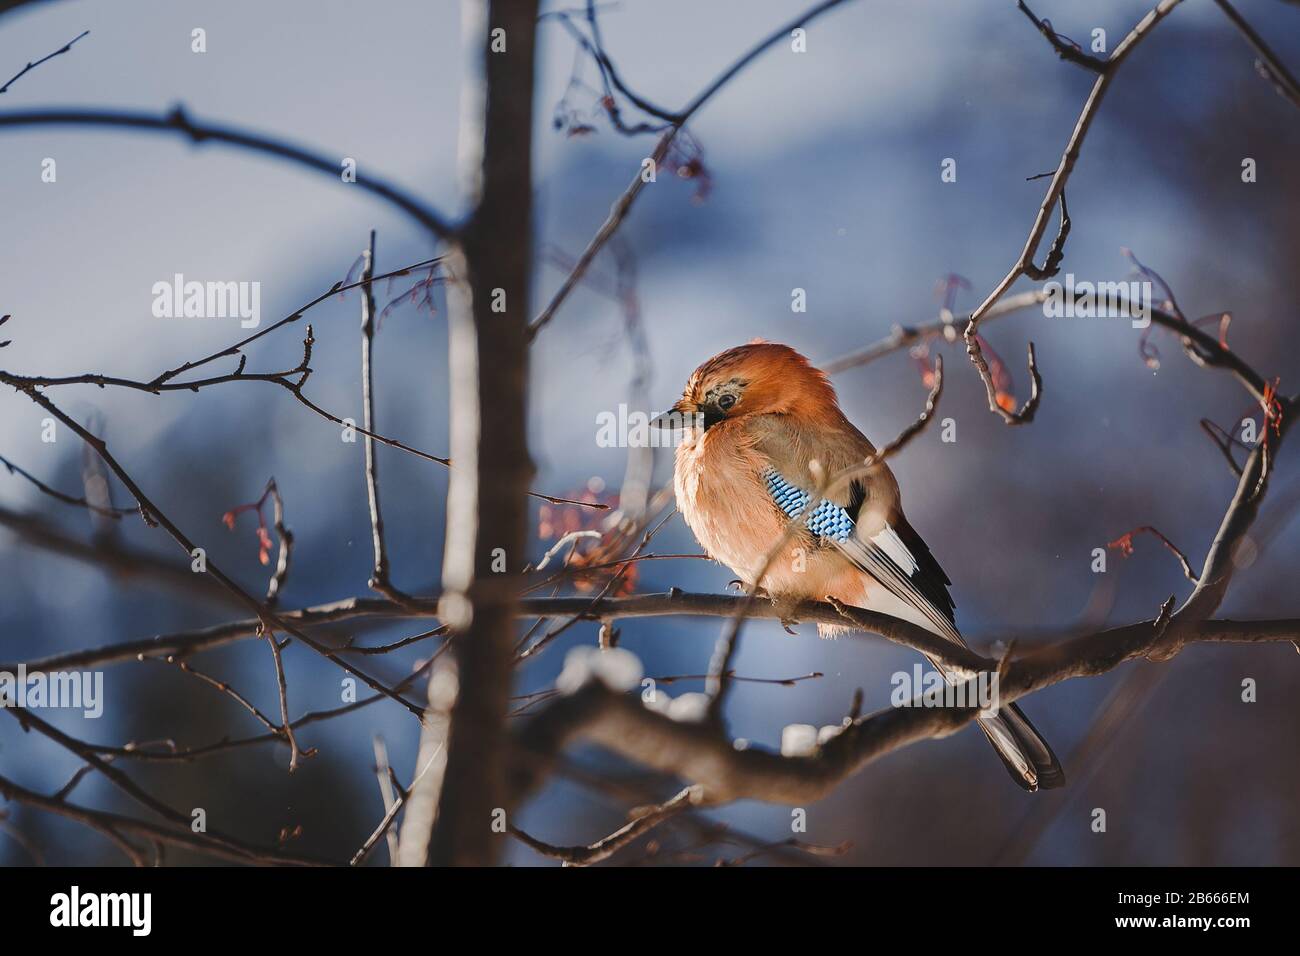 Colorful bird Eurasian Jay Garrulus glandarius sitting on the branch of a tree in winter or spring forest Stock Photo